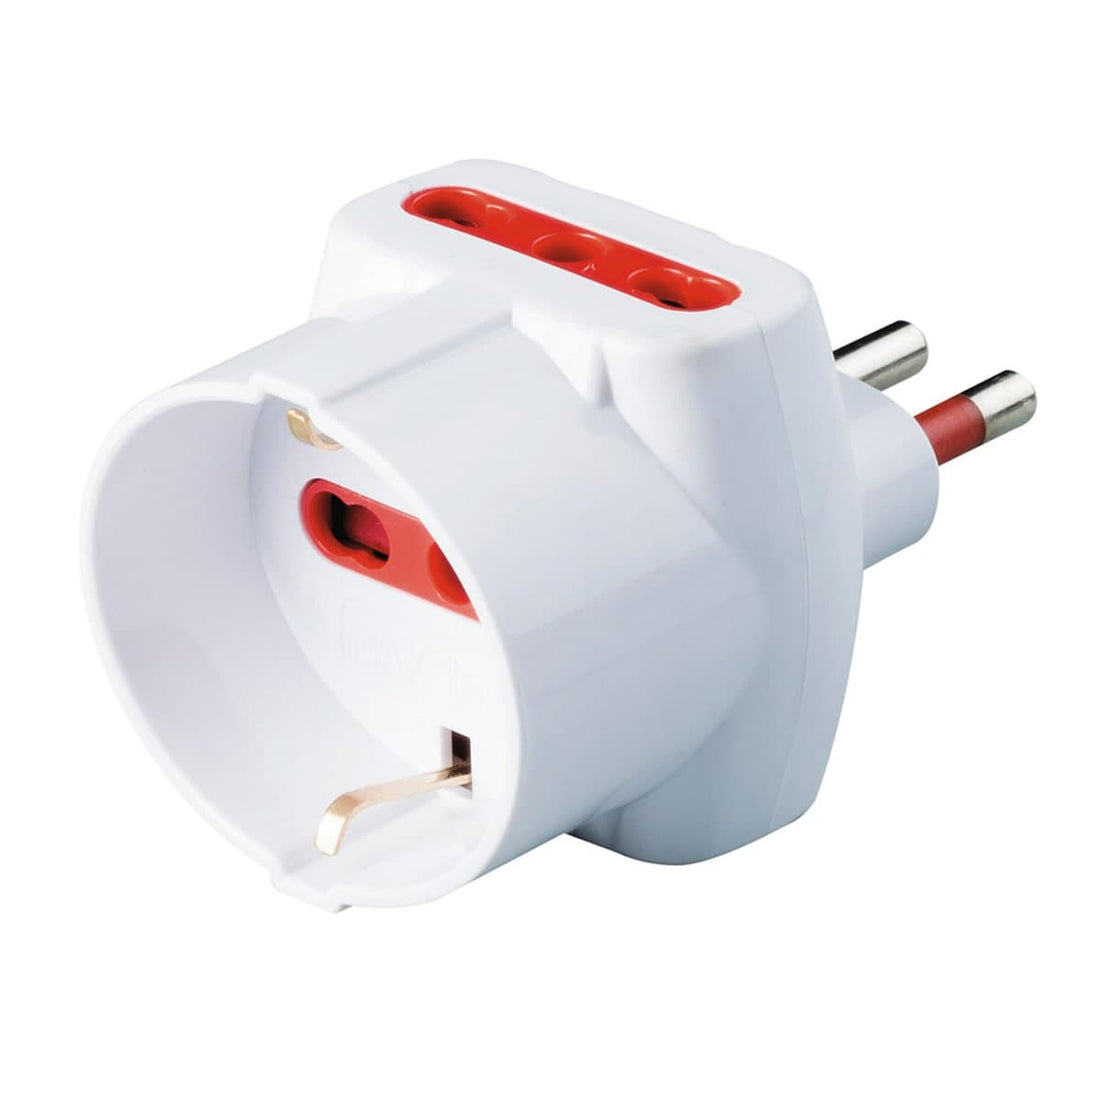 ADAPTER PLUG 10A 2 SOCKETS 10/16A 1 UNIVERSAL WITH SELF-RESETTING LIMITER WHITE - best price from Maltashopper.com BR420002471